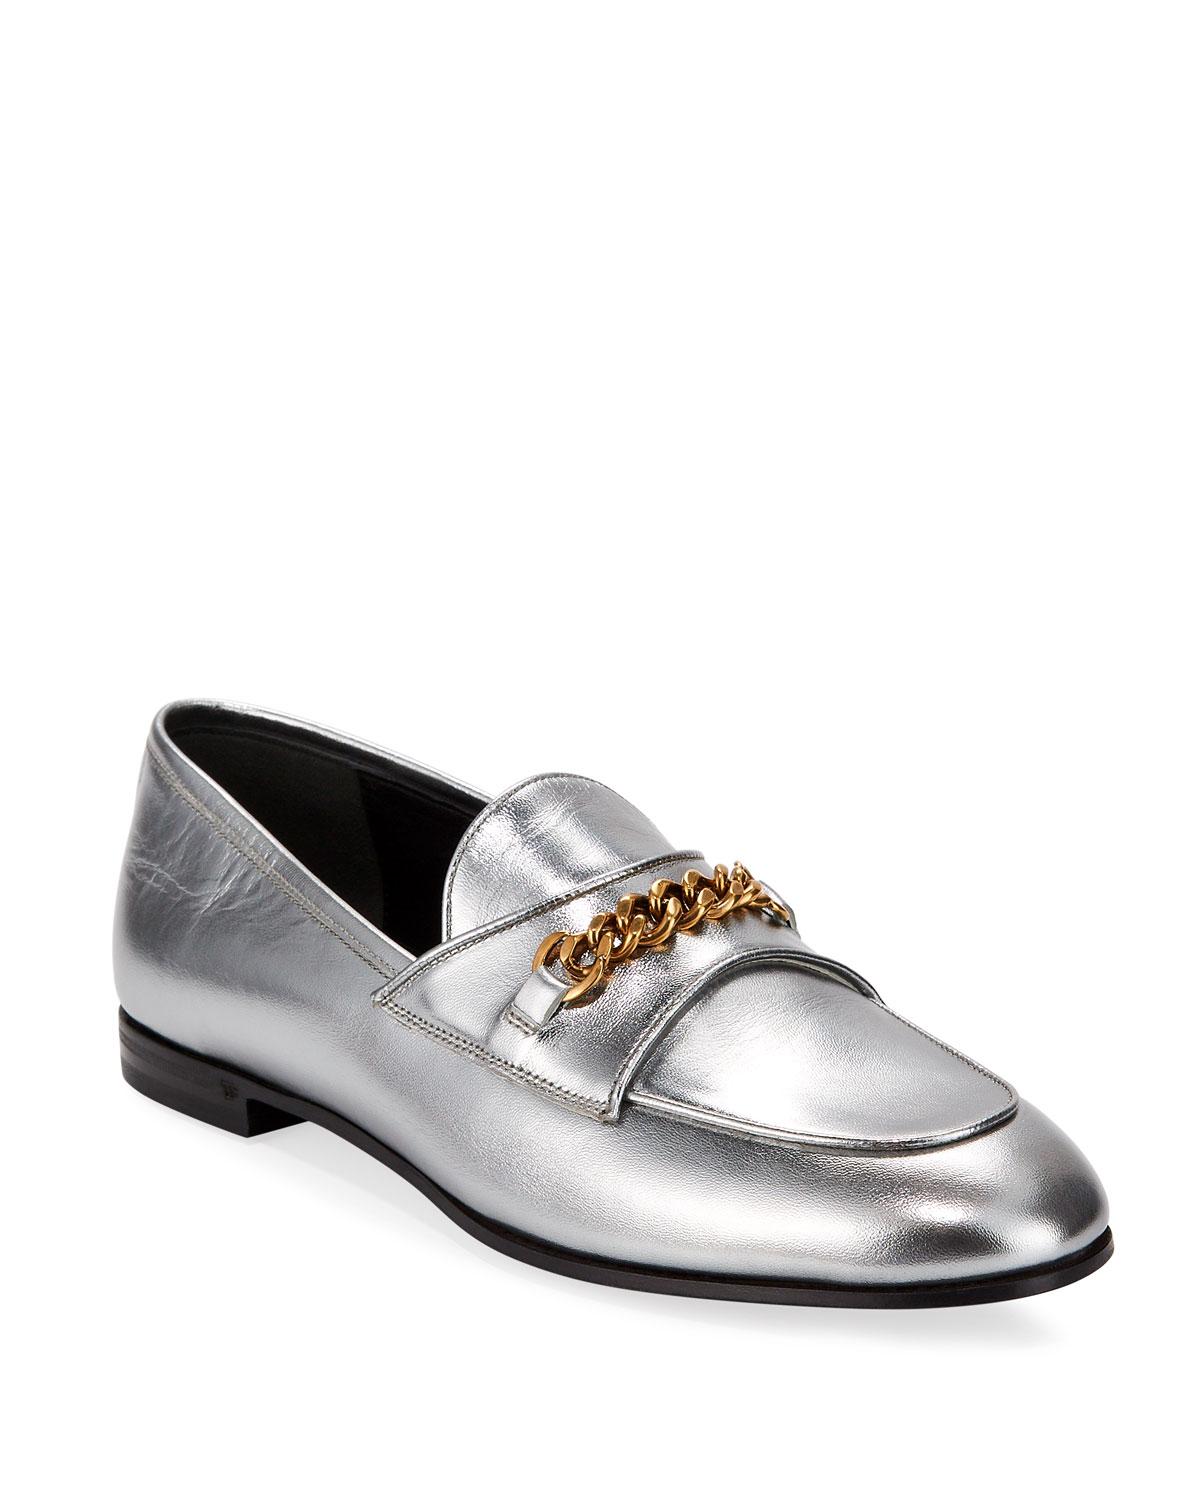 Tom Ford Laminated Chain Loafers in Metallic | Lyst